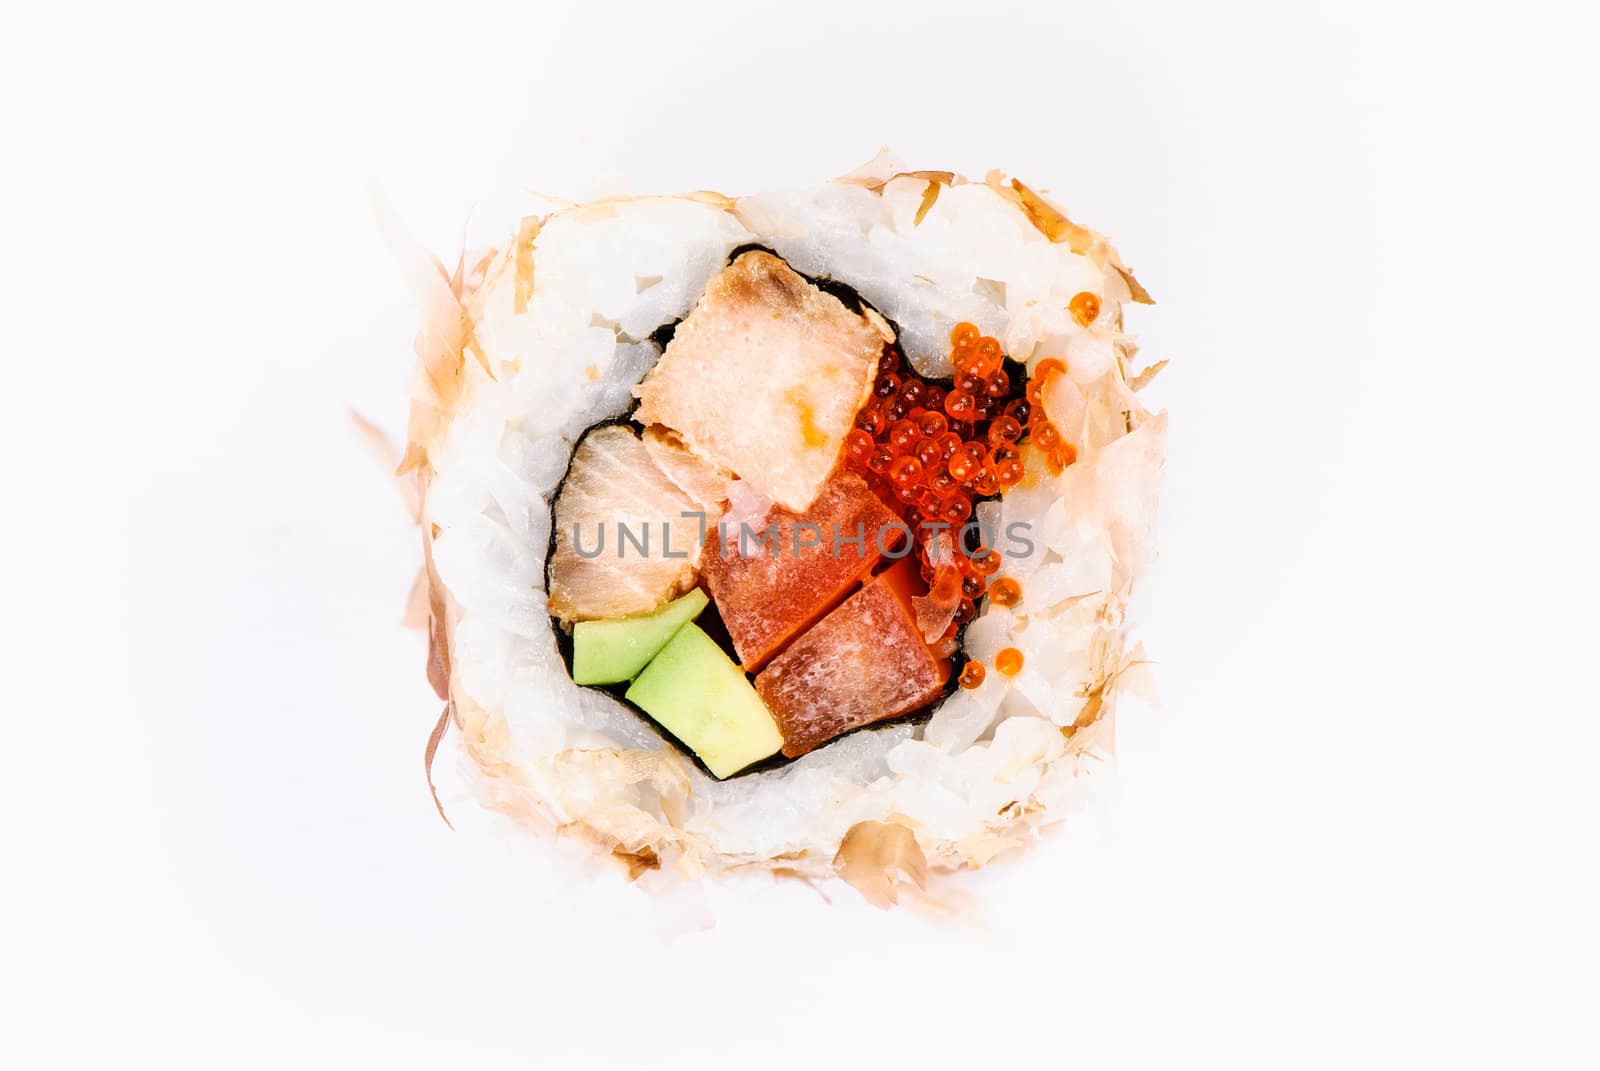 Sushi with avocado, fish and red caviar on white background